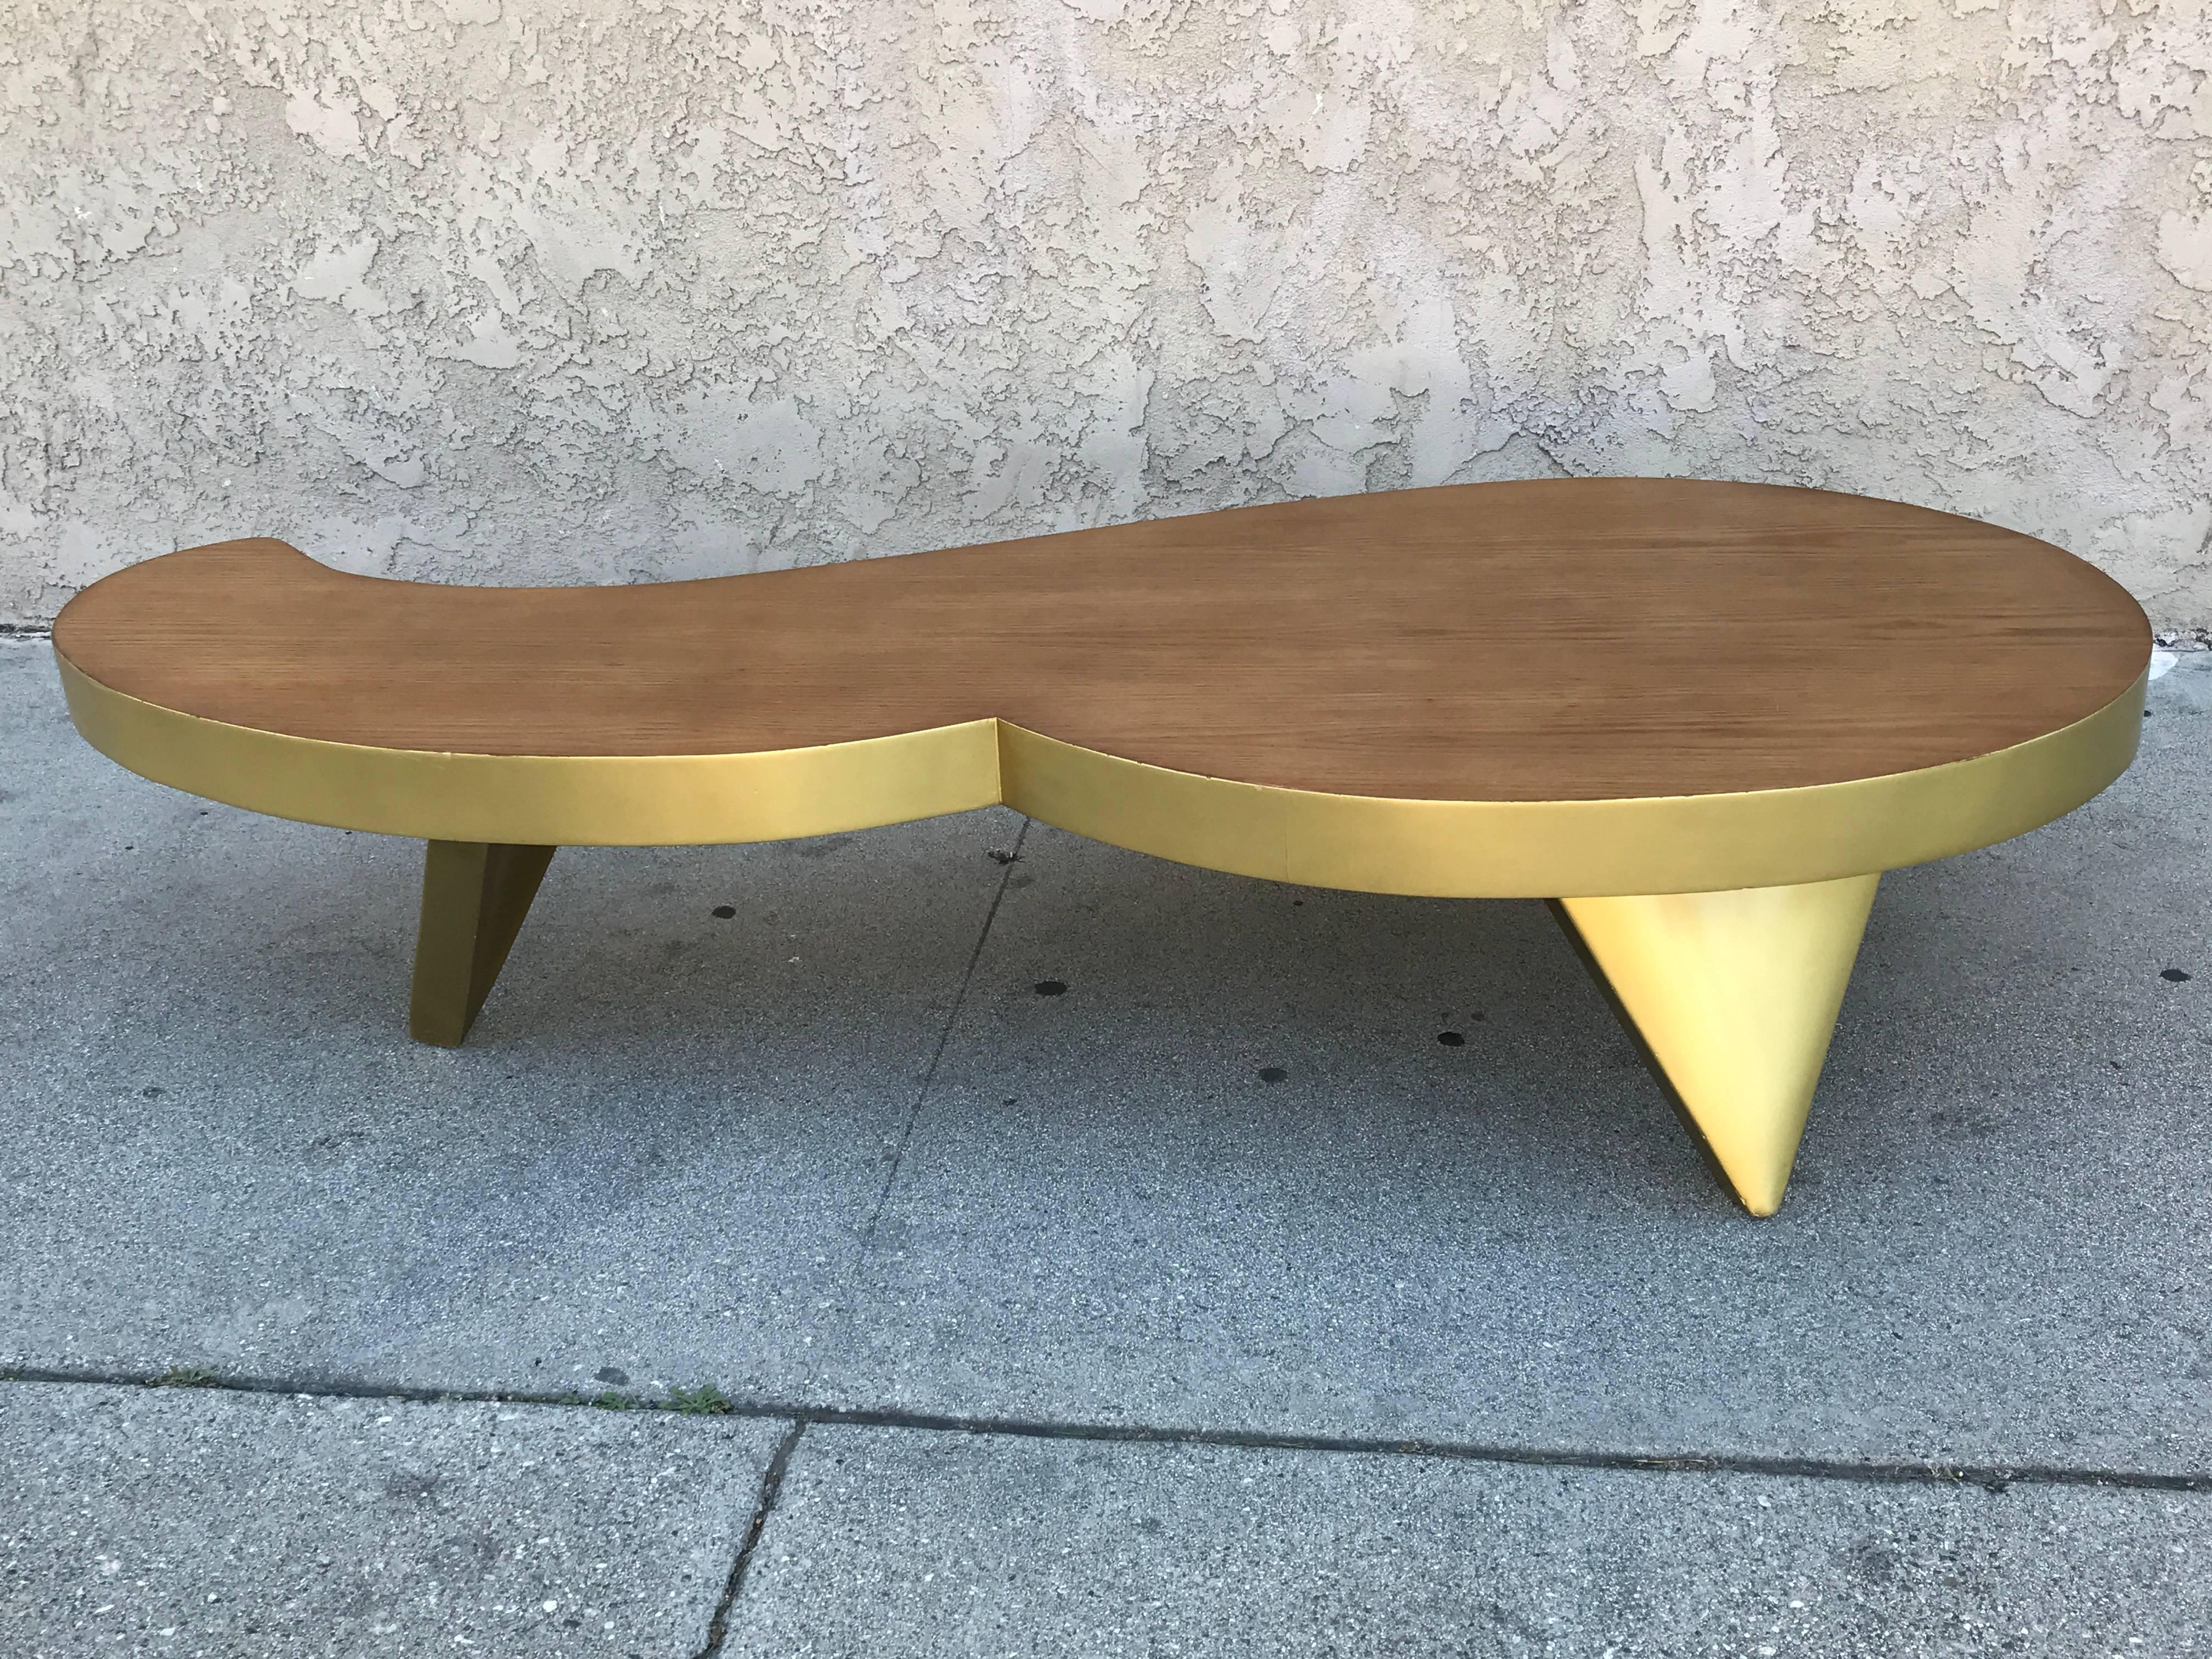 This coffee table features an interesting and contradictory mix of material: Oak with a flat finish for the top and gold lacquer for the skirt and the legs.
The shape is unusual and typically 1980s. (The fun and whimsical part).

The wood top is